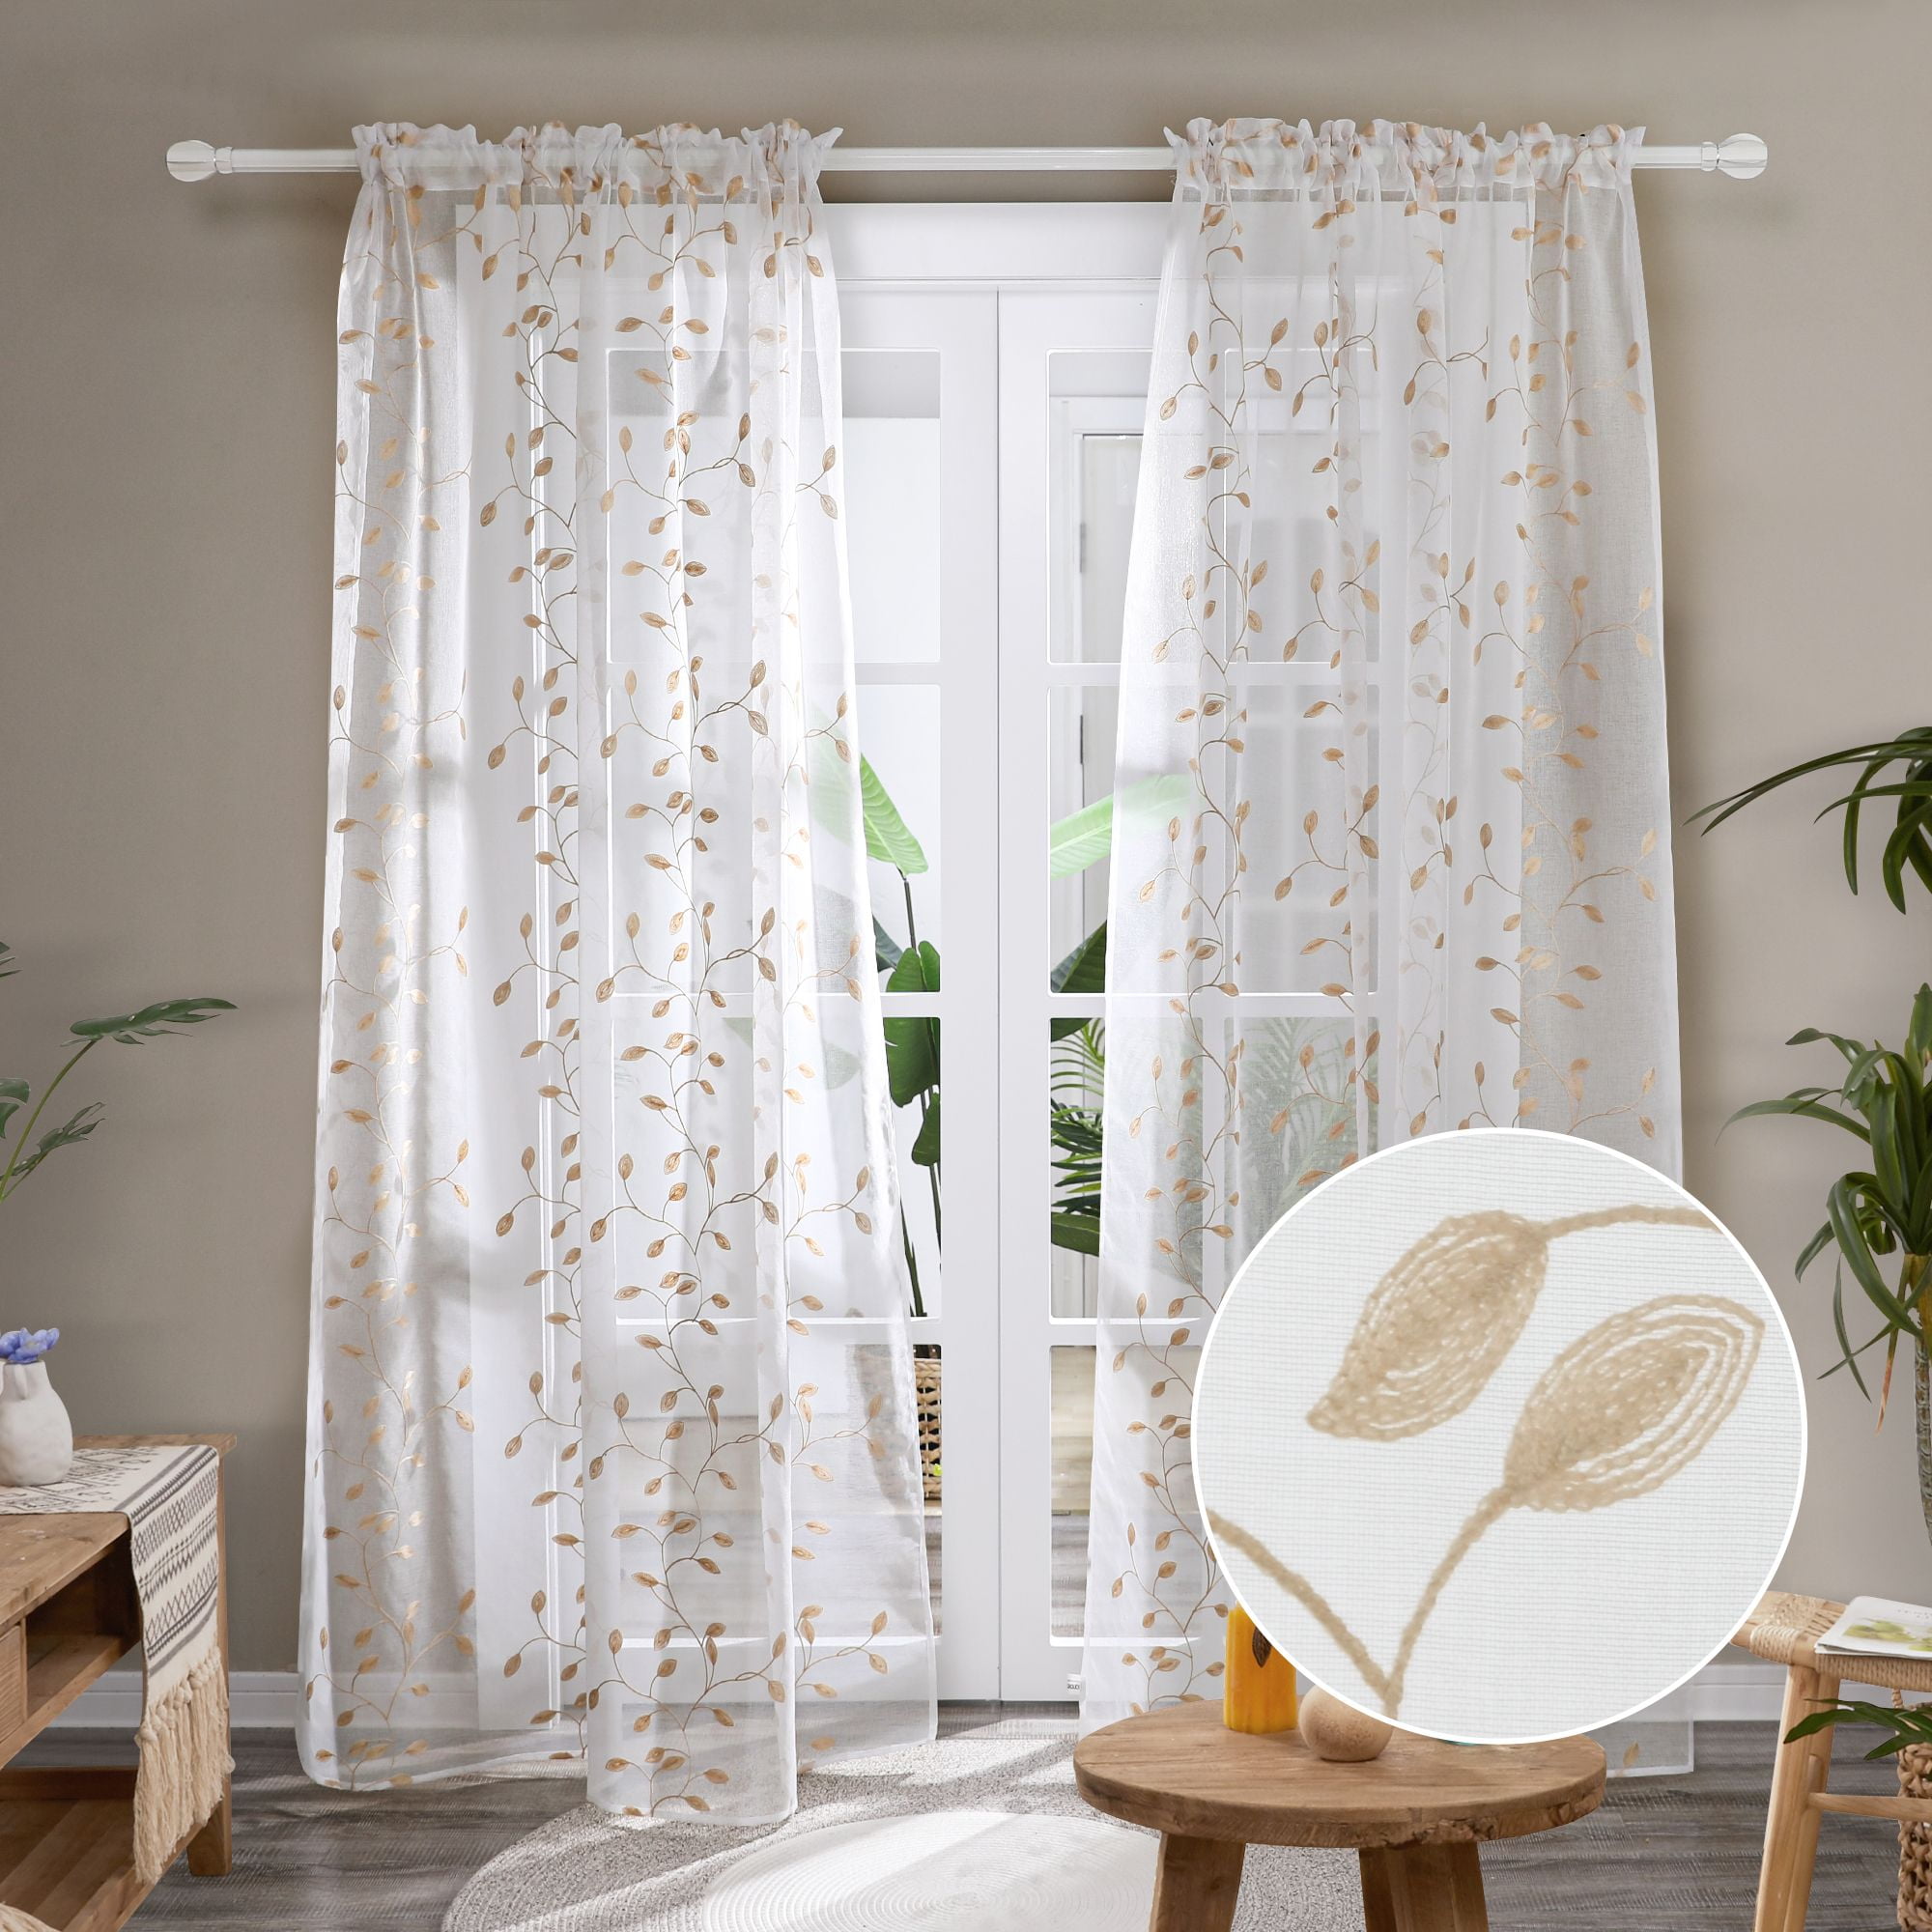 Custom French Romatic Floral Embroidery Ivory White Net Sheer Curtain Panel 